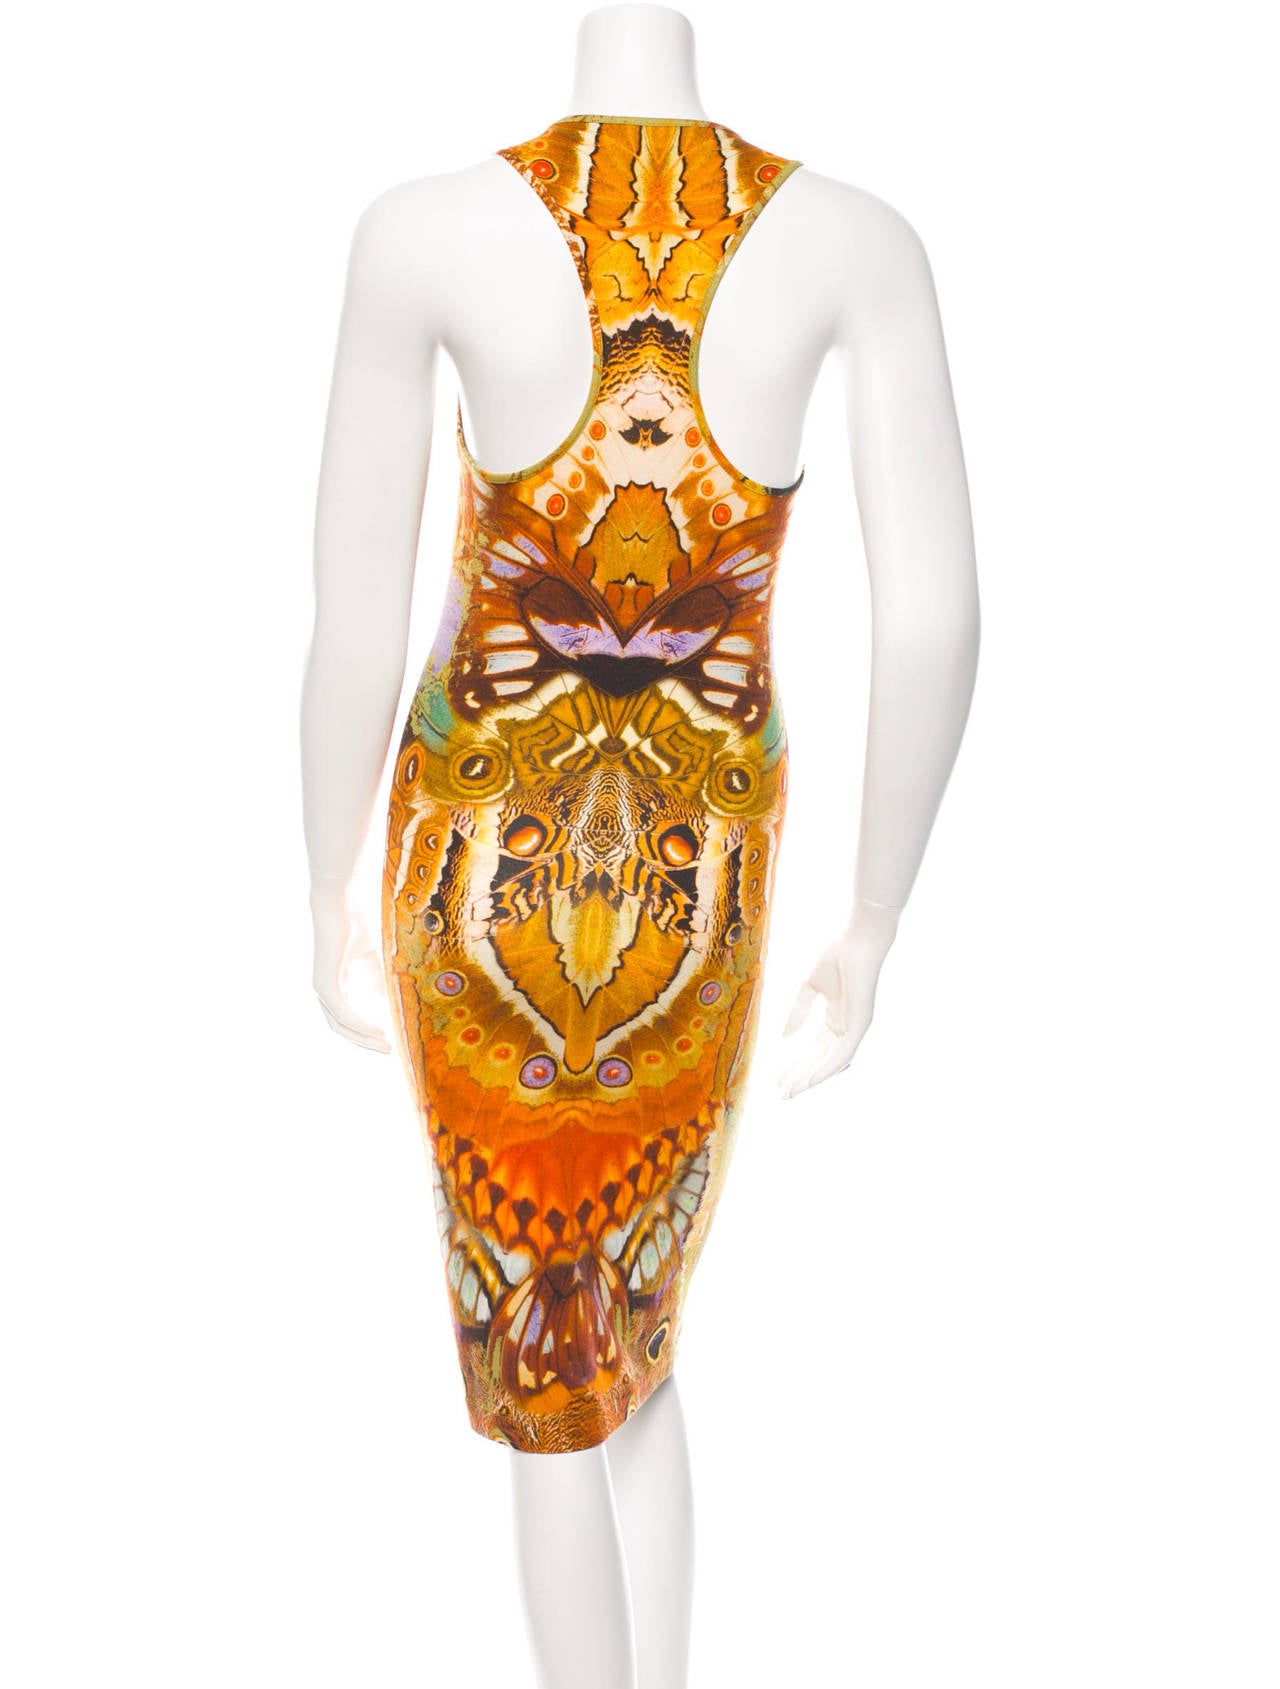 Alexander McQueen Digitized Moth Print Dress, SS 2010 In Excellent Condition For Sale In Bethesda, MD